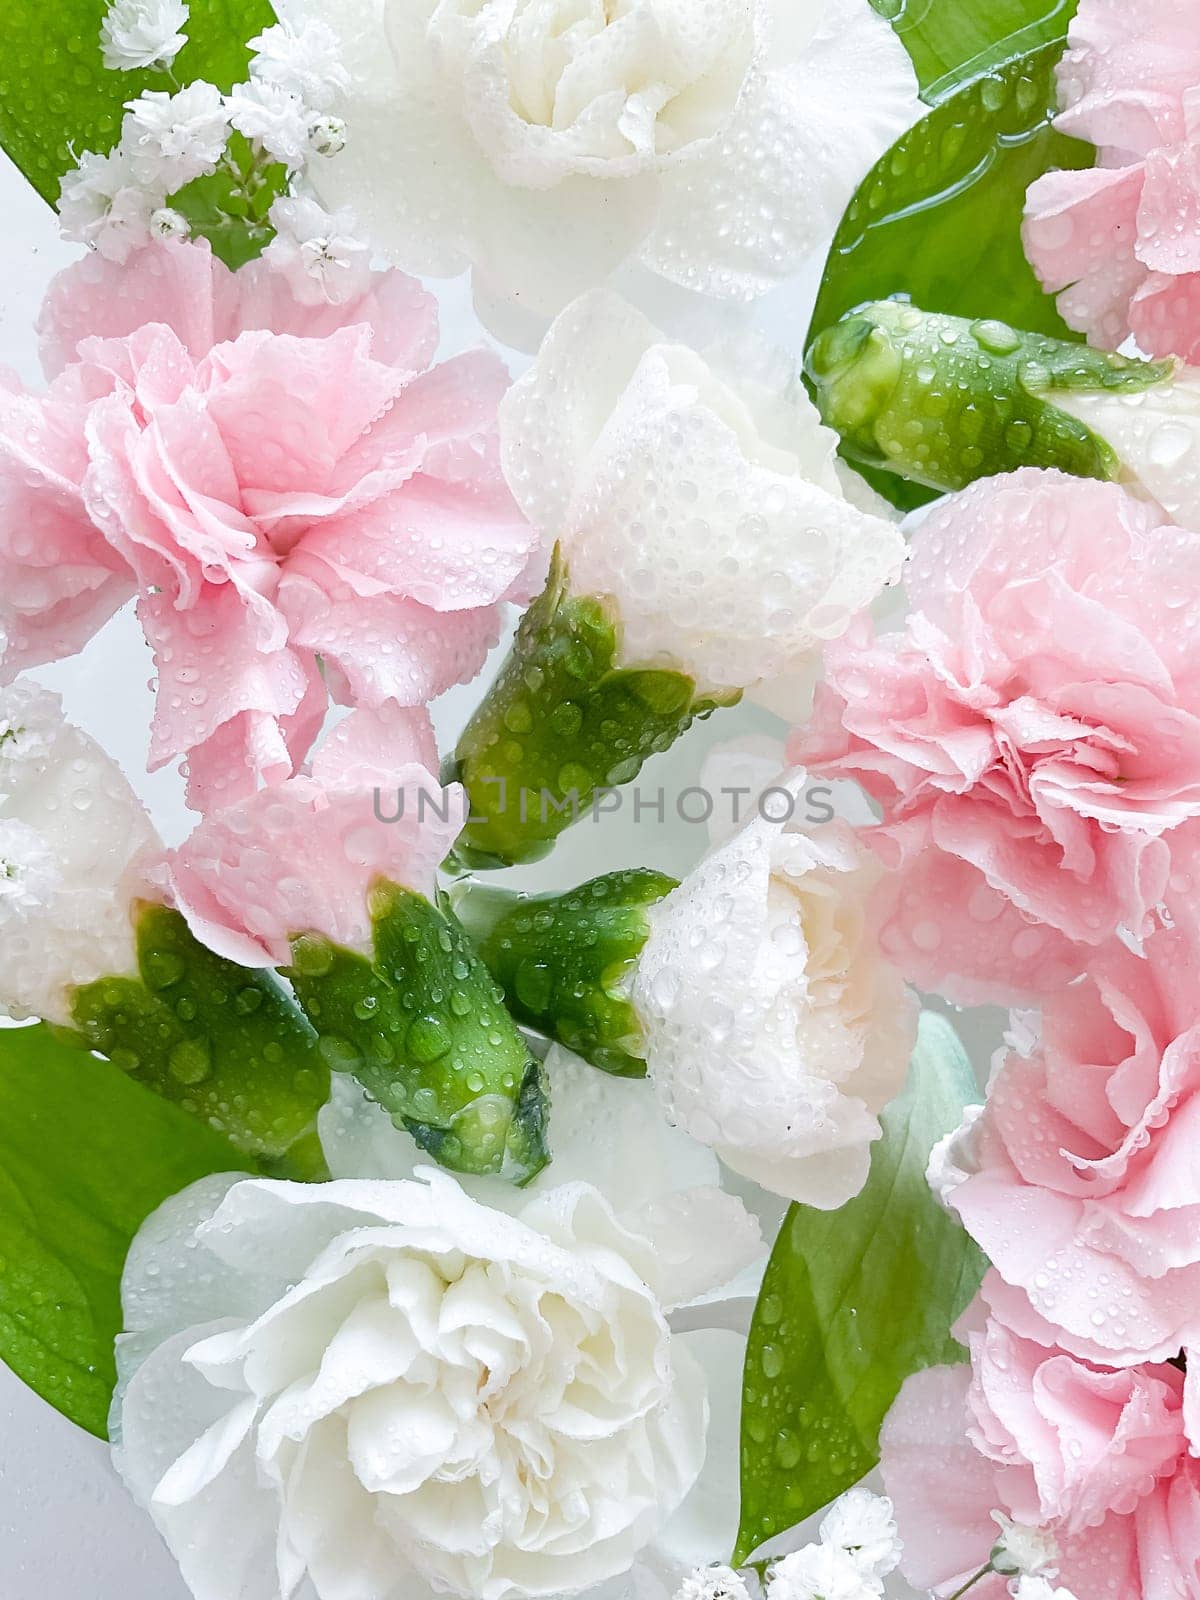 Carnation in water, spa background. Leaves, gypsophila and carnation with water drops.